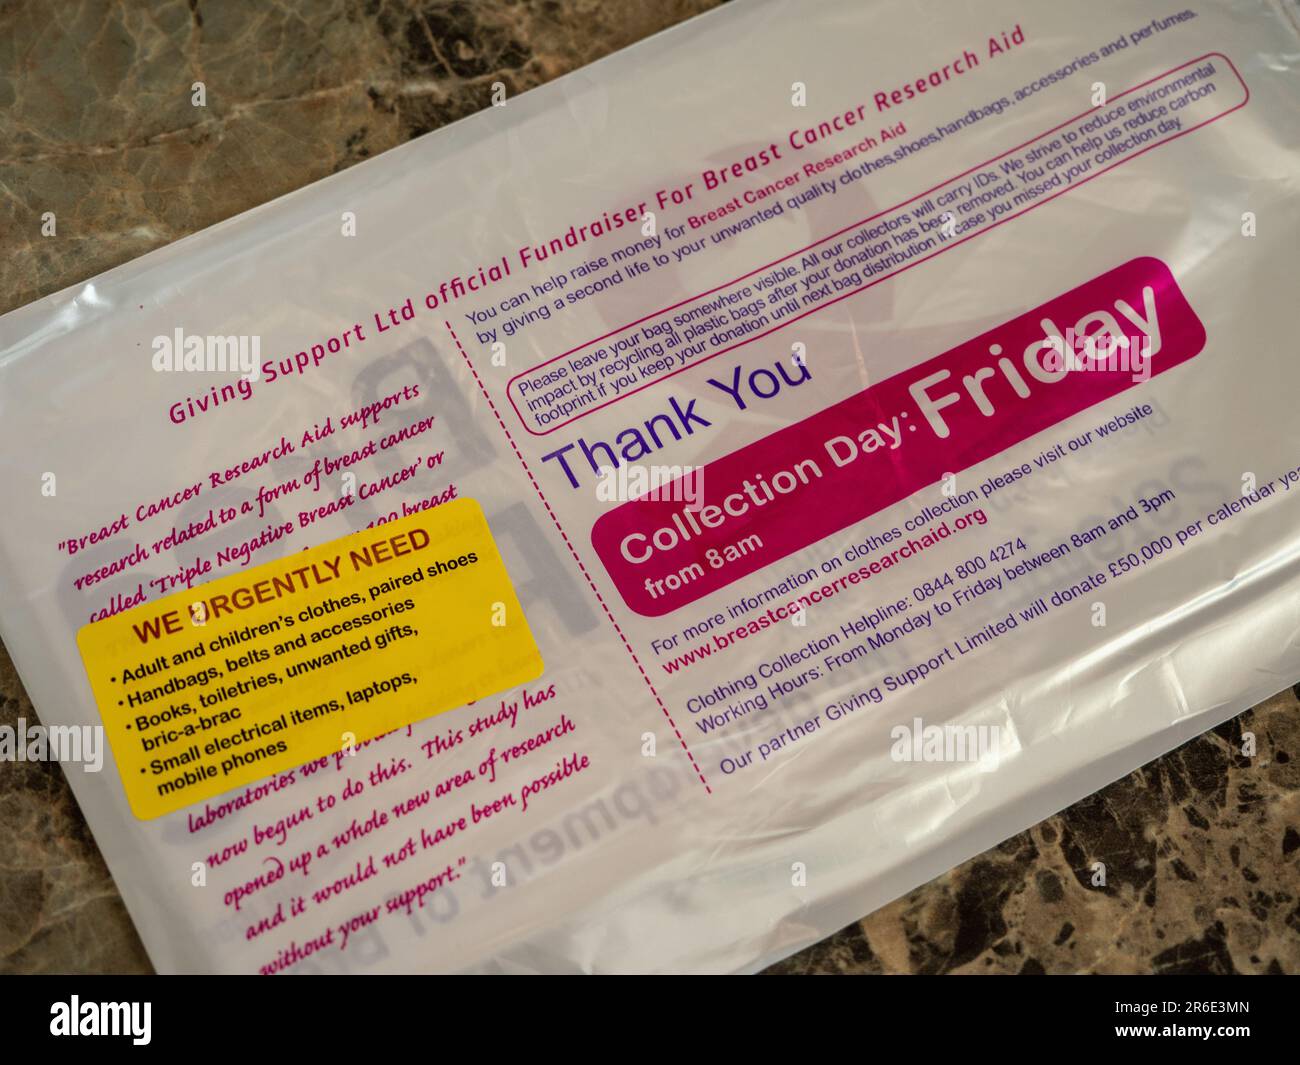 Charity collection bag for Breast Cancer Research Aid delivered to a UK home. Stock Photo